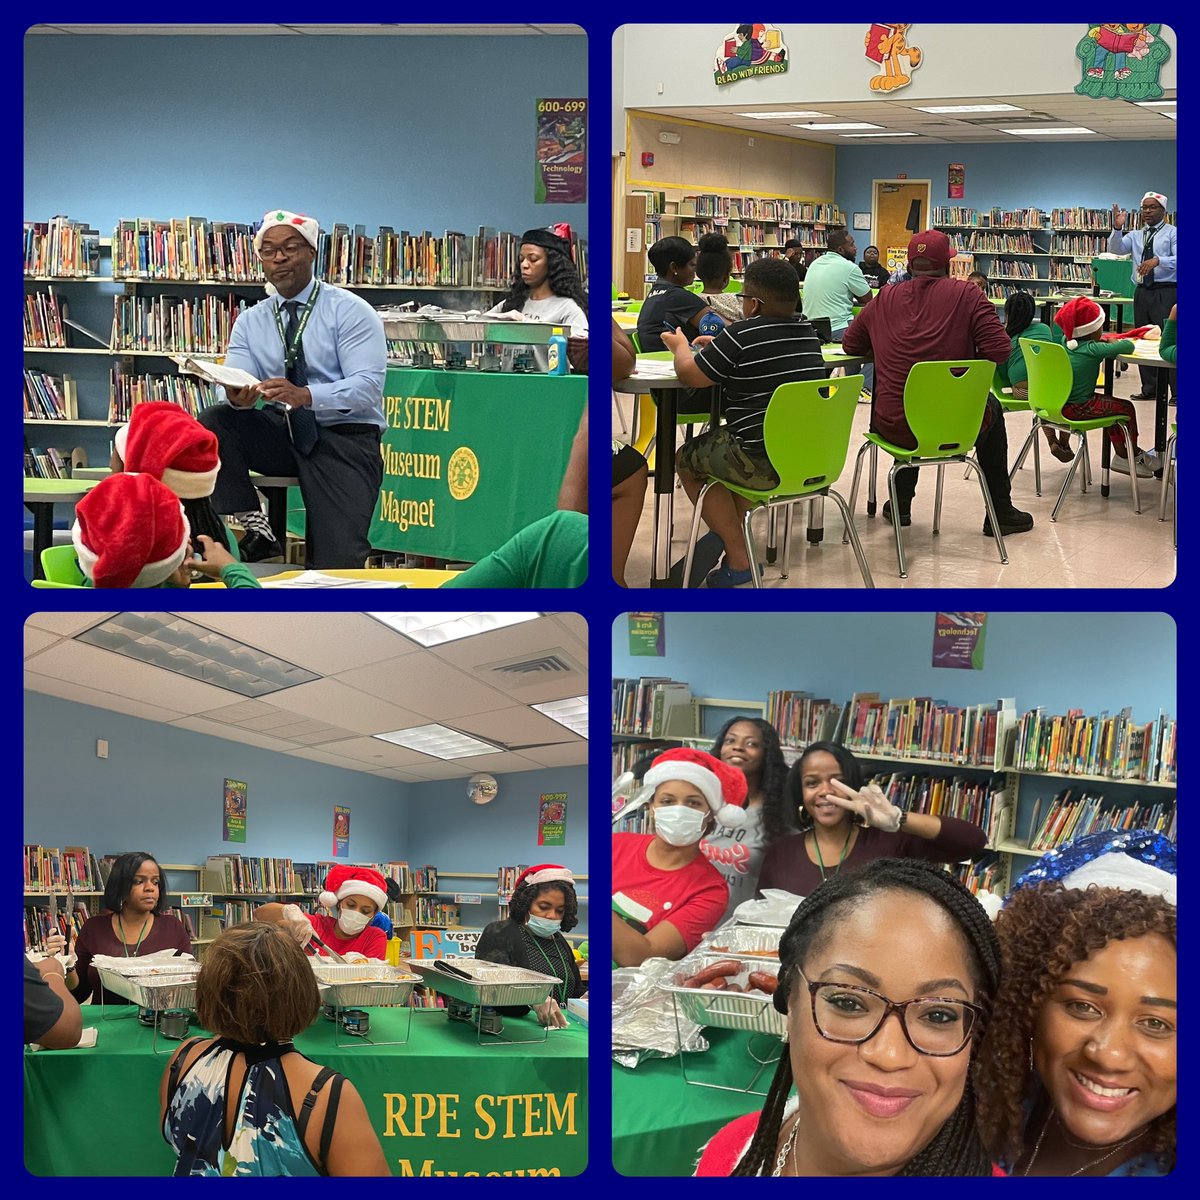 Had a great evening with our families and @PrincipalDarby1 at our Pancake with the Principal event! Principal Darby discussed several topics, gathered parent input, and fed their bellies. Family engagement continues to be a priority @RPEMuseummagnet. @BcpsCentral_